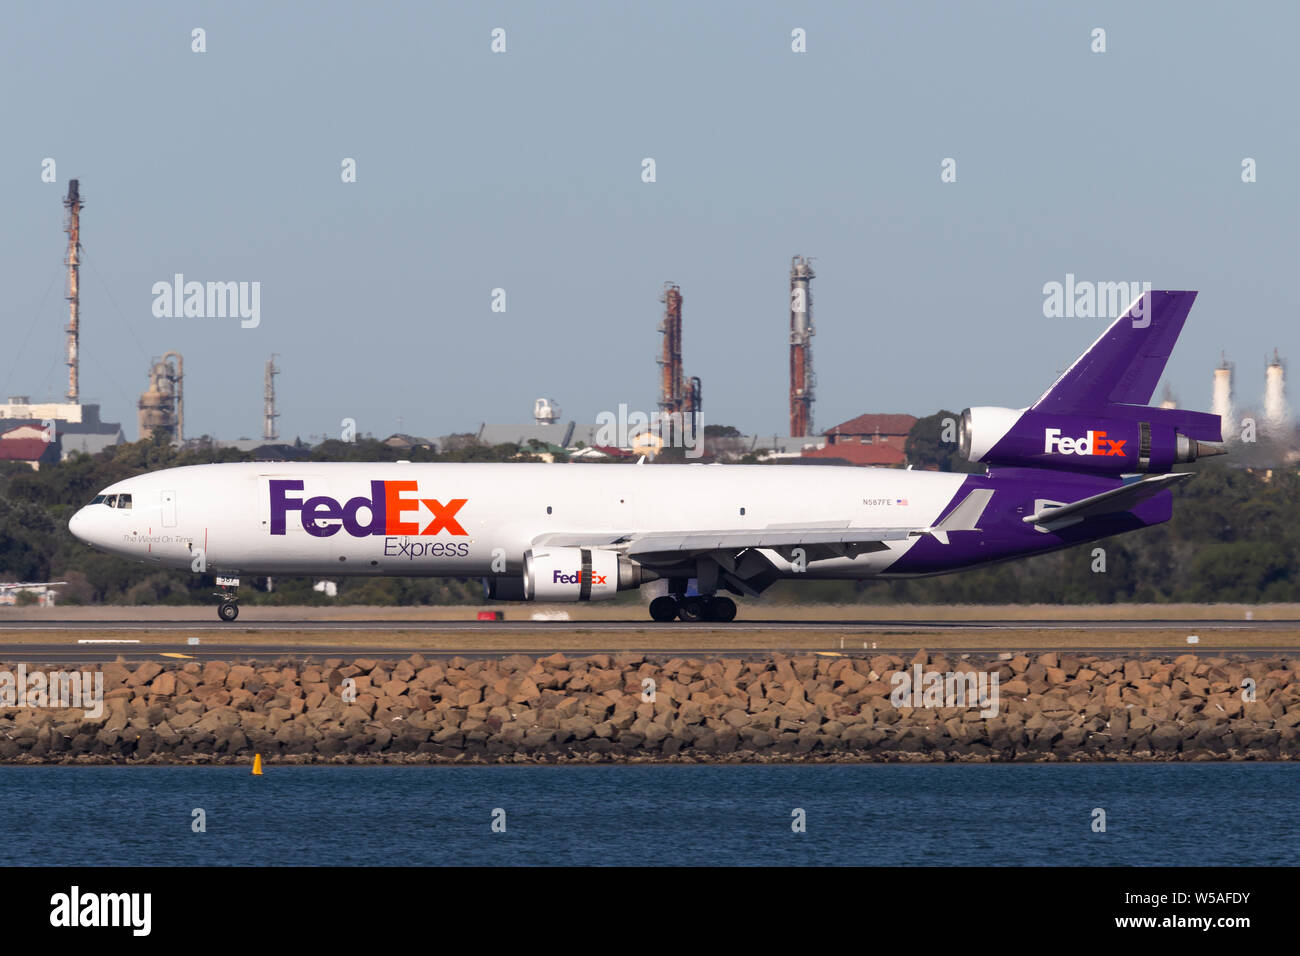 Federal Express (FedEx) McDonnell Douglas MD-11F cargo aircraft at Sydney Airport. Stock Photo